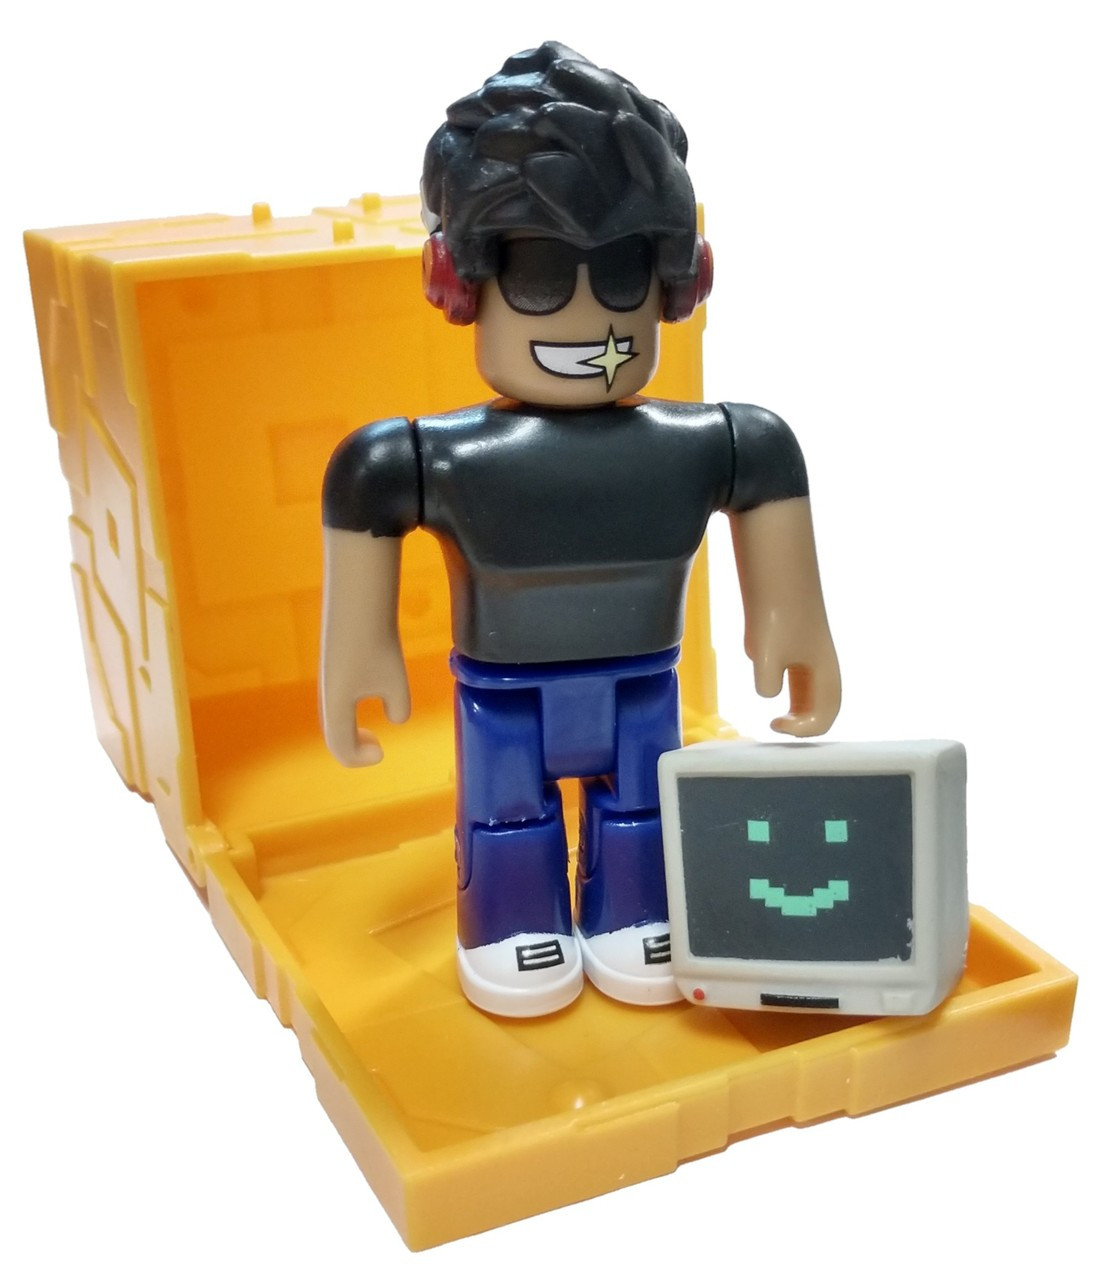 Roblox Series 5 Simbuilder 3 Mini Figure With Gold Cube And Online Code Loose Jazwares Toywiz - roblox profile being online